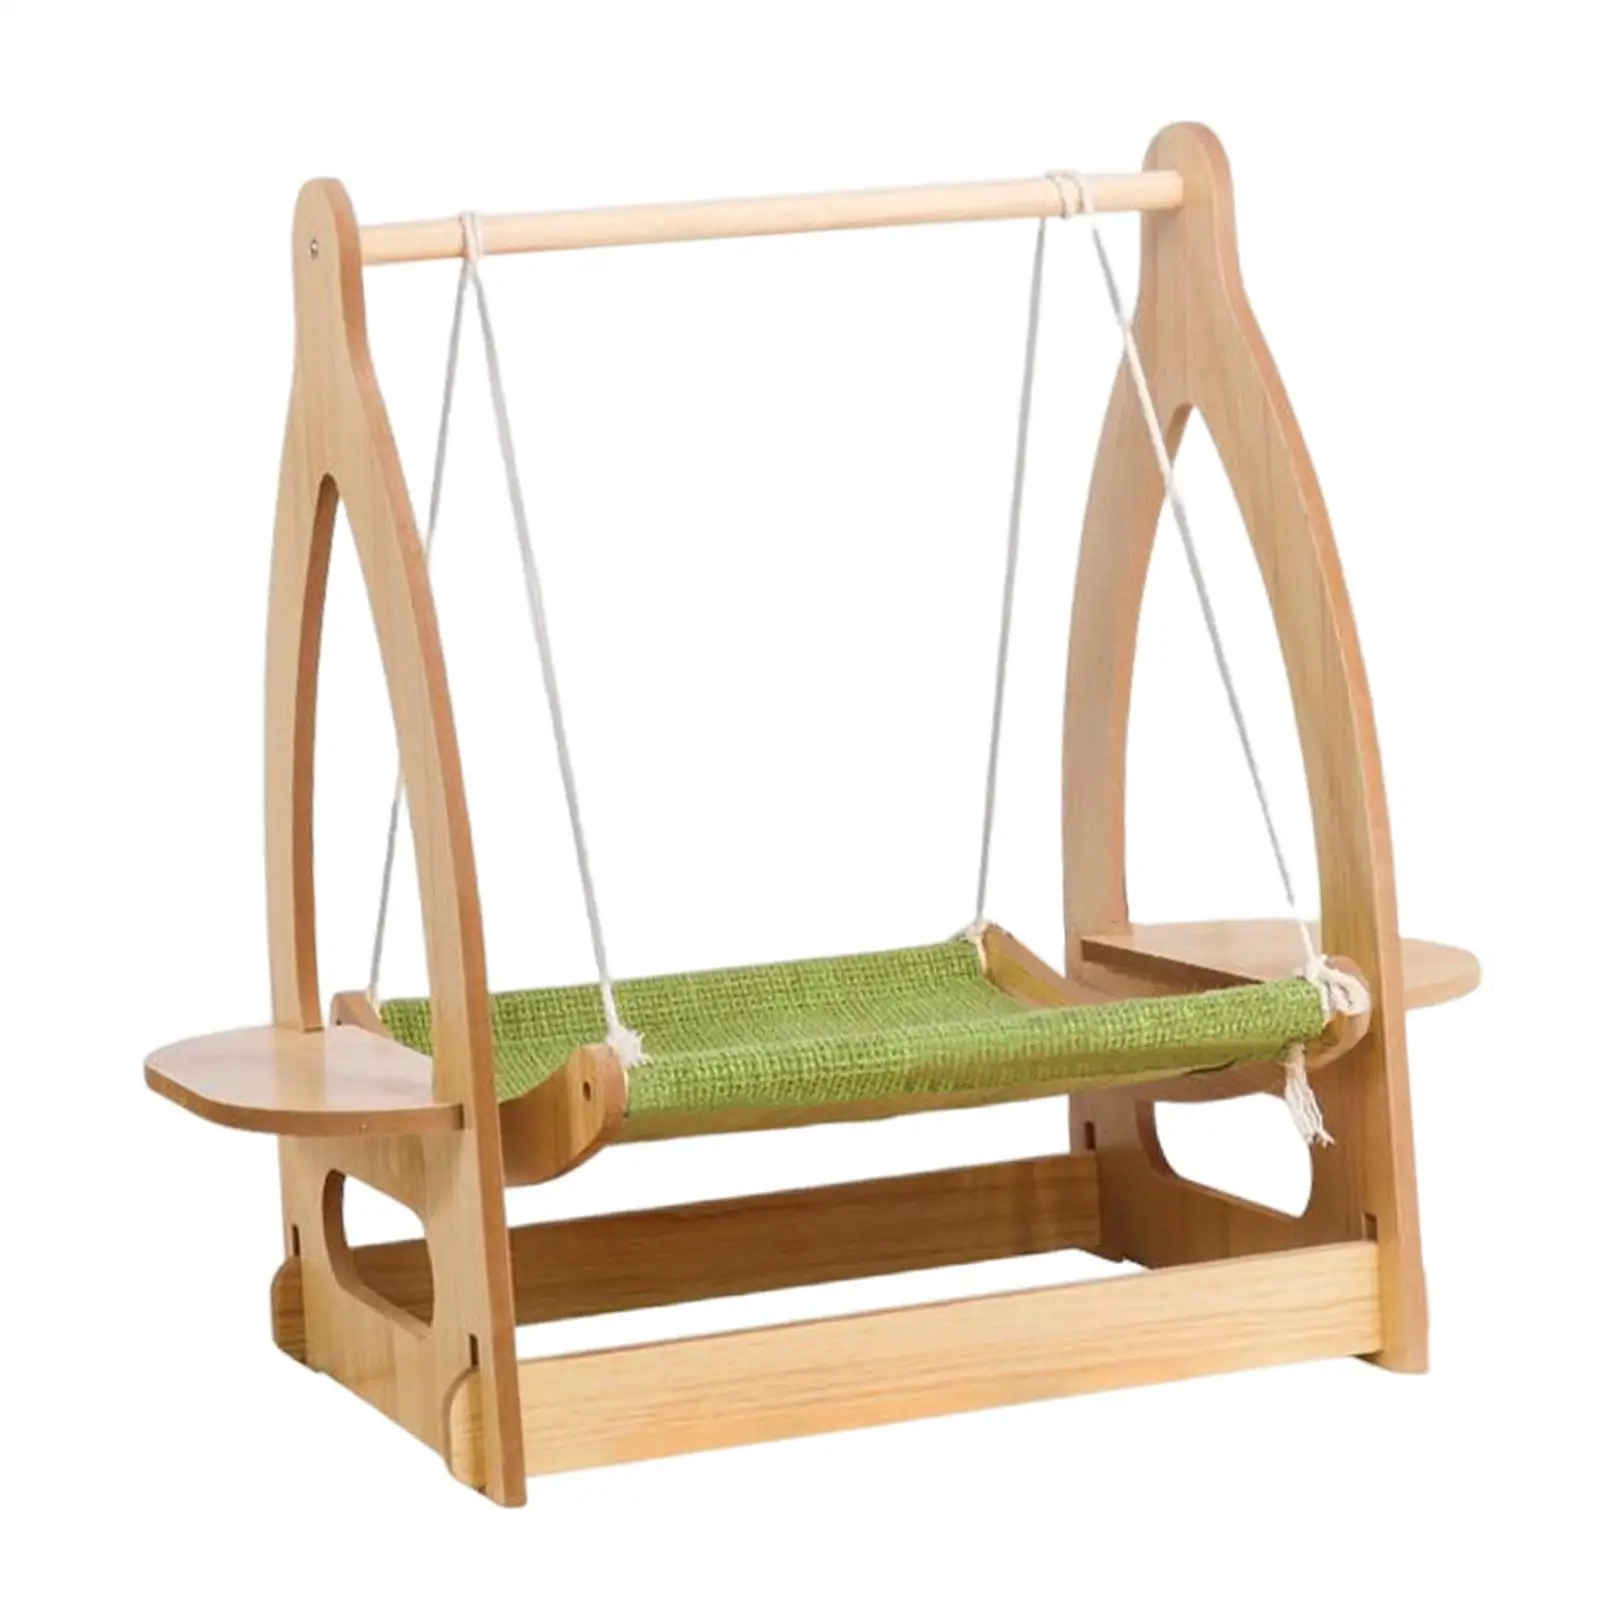 Cat Hammock Activity Toy Pet Bed Lounger Wood Frame Stable Structure Pet Hanging